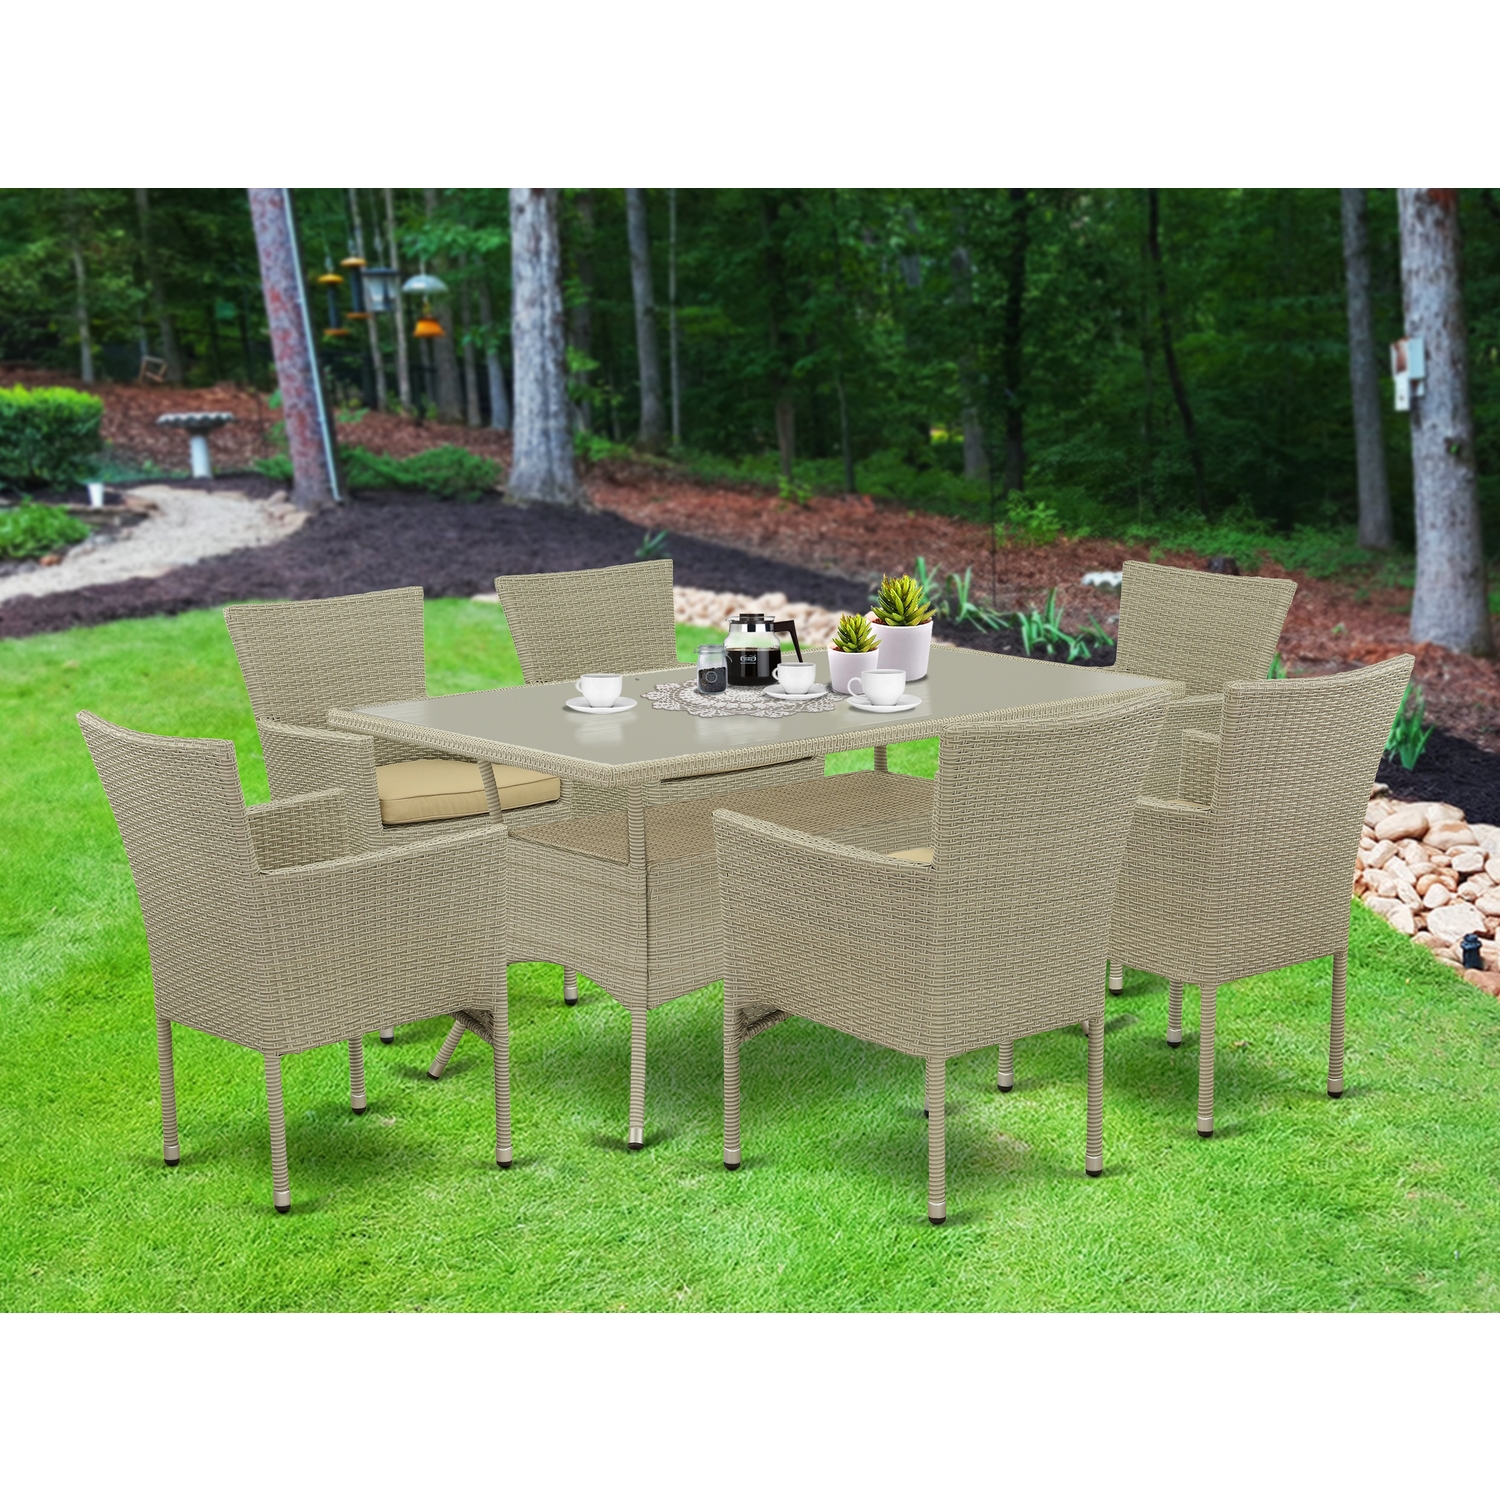 East West Furniture Oslo 7-piece Modern Metal Patio Set in Natural - image 1 of 4